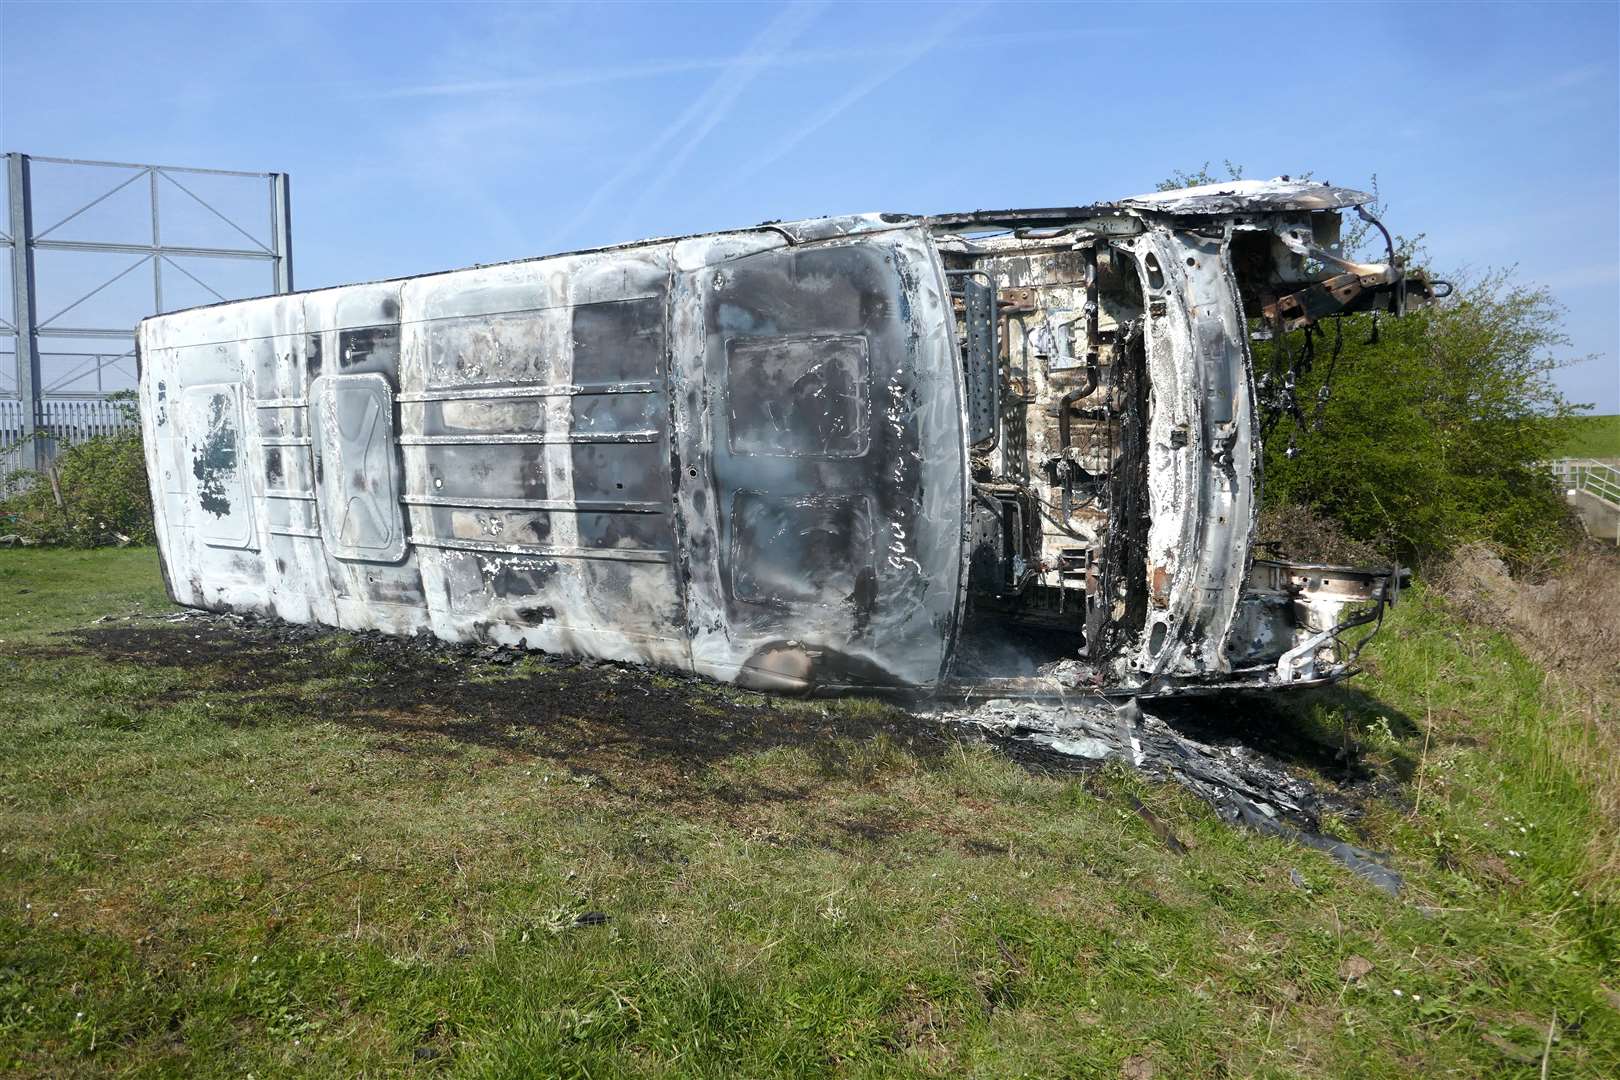 A burnt-out bus found on land near Wharf Road, Gravesend (8665450)